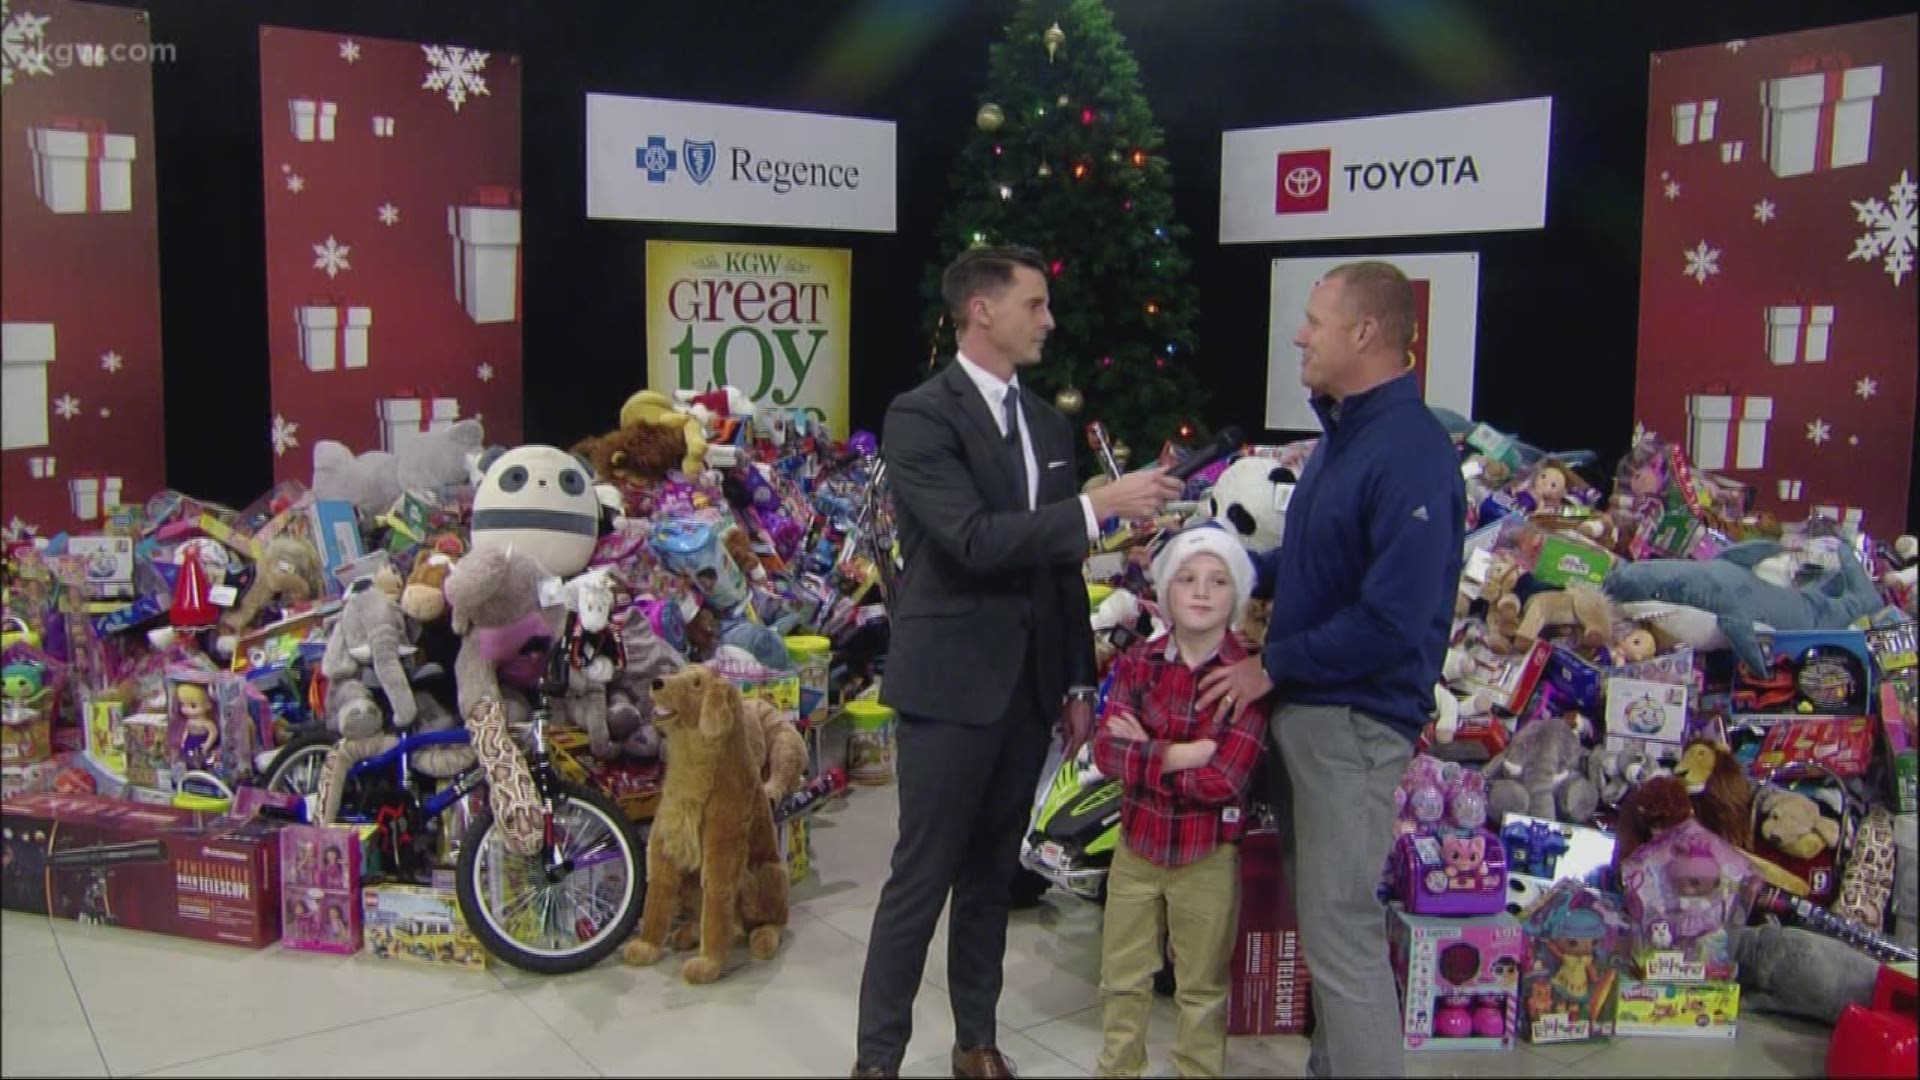 Andrew Over of Regence, and his son Dylan, talk with us about 16 years of making the KGW Great Toy Drive happen. kgw.com/toy